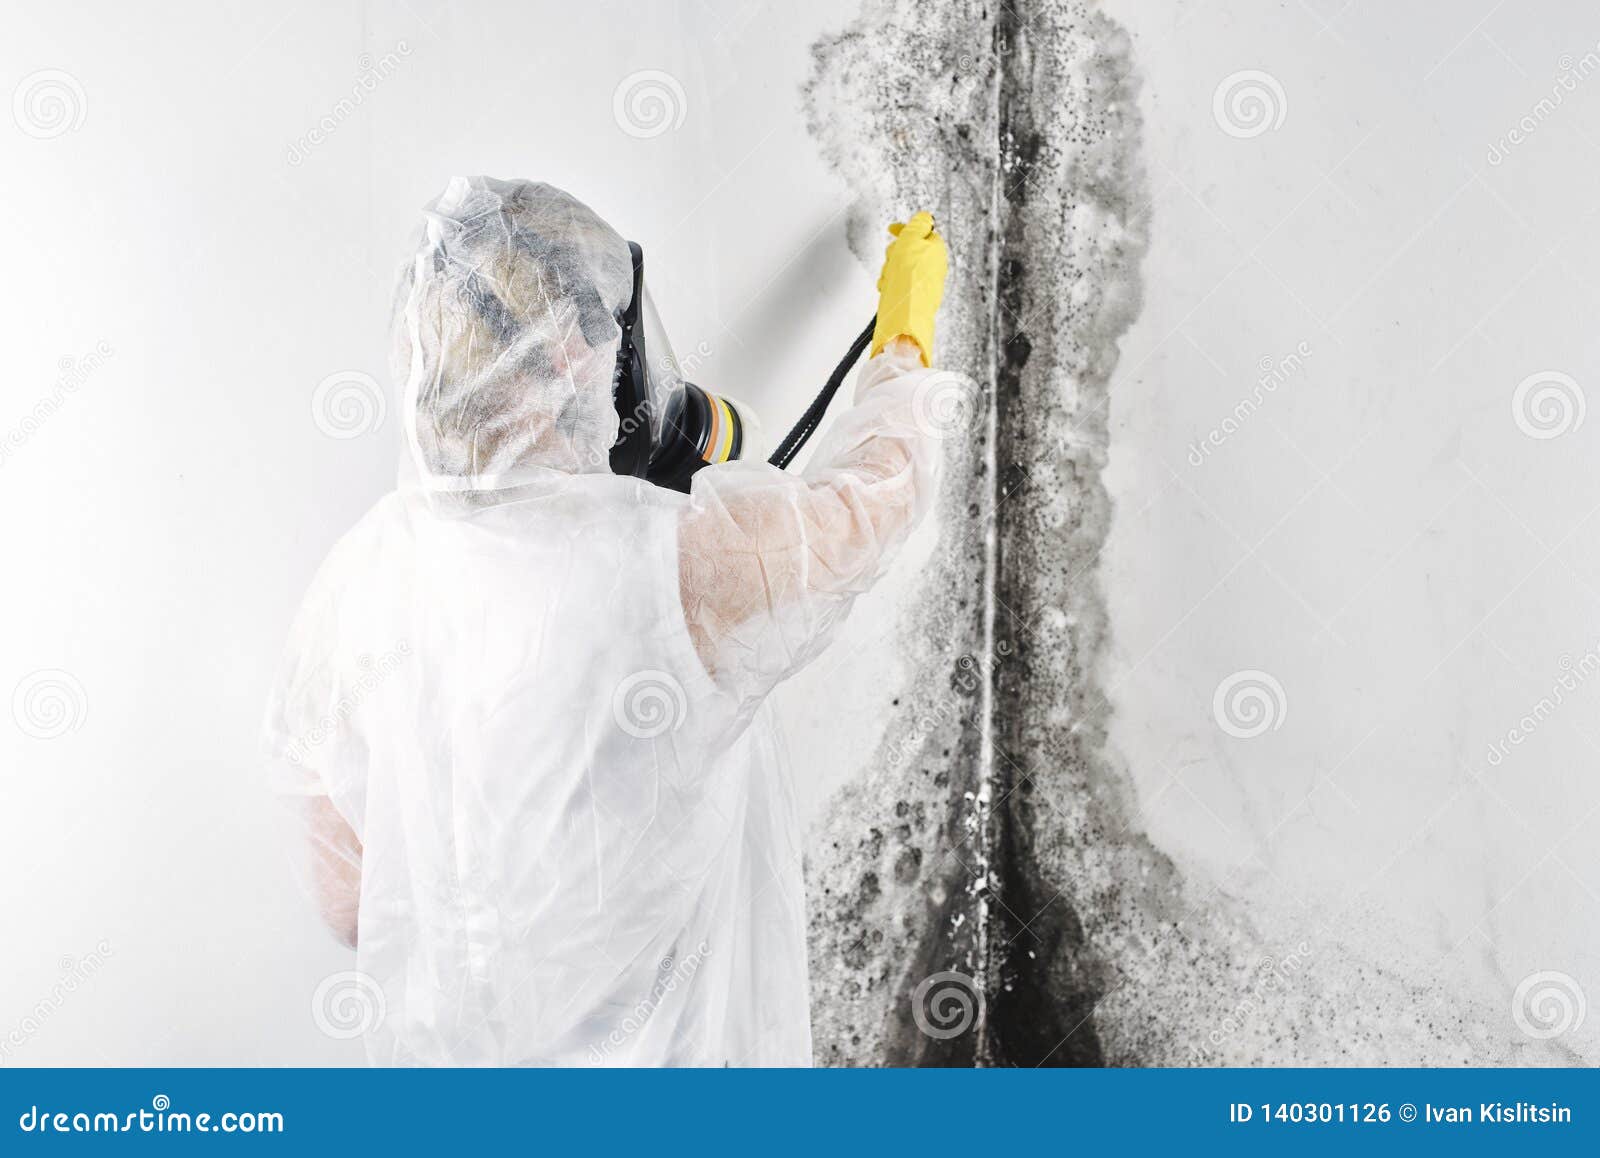 a professional disinfector in overalls processes the walls from mold. removal of black fungus in the apartment and house. aspergil